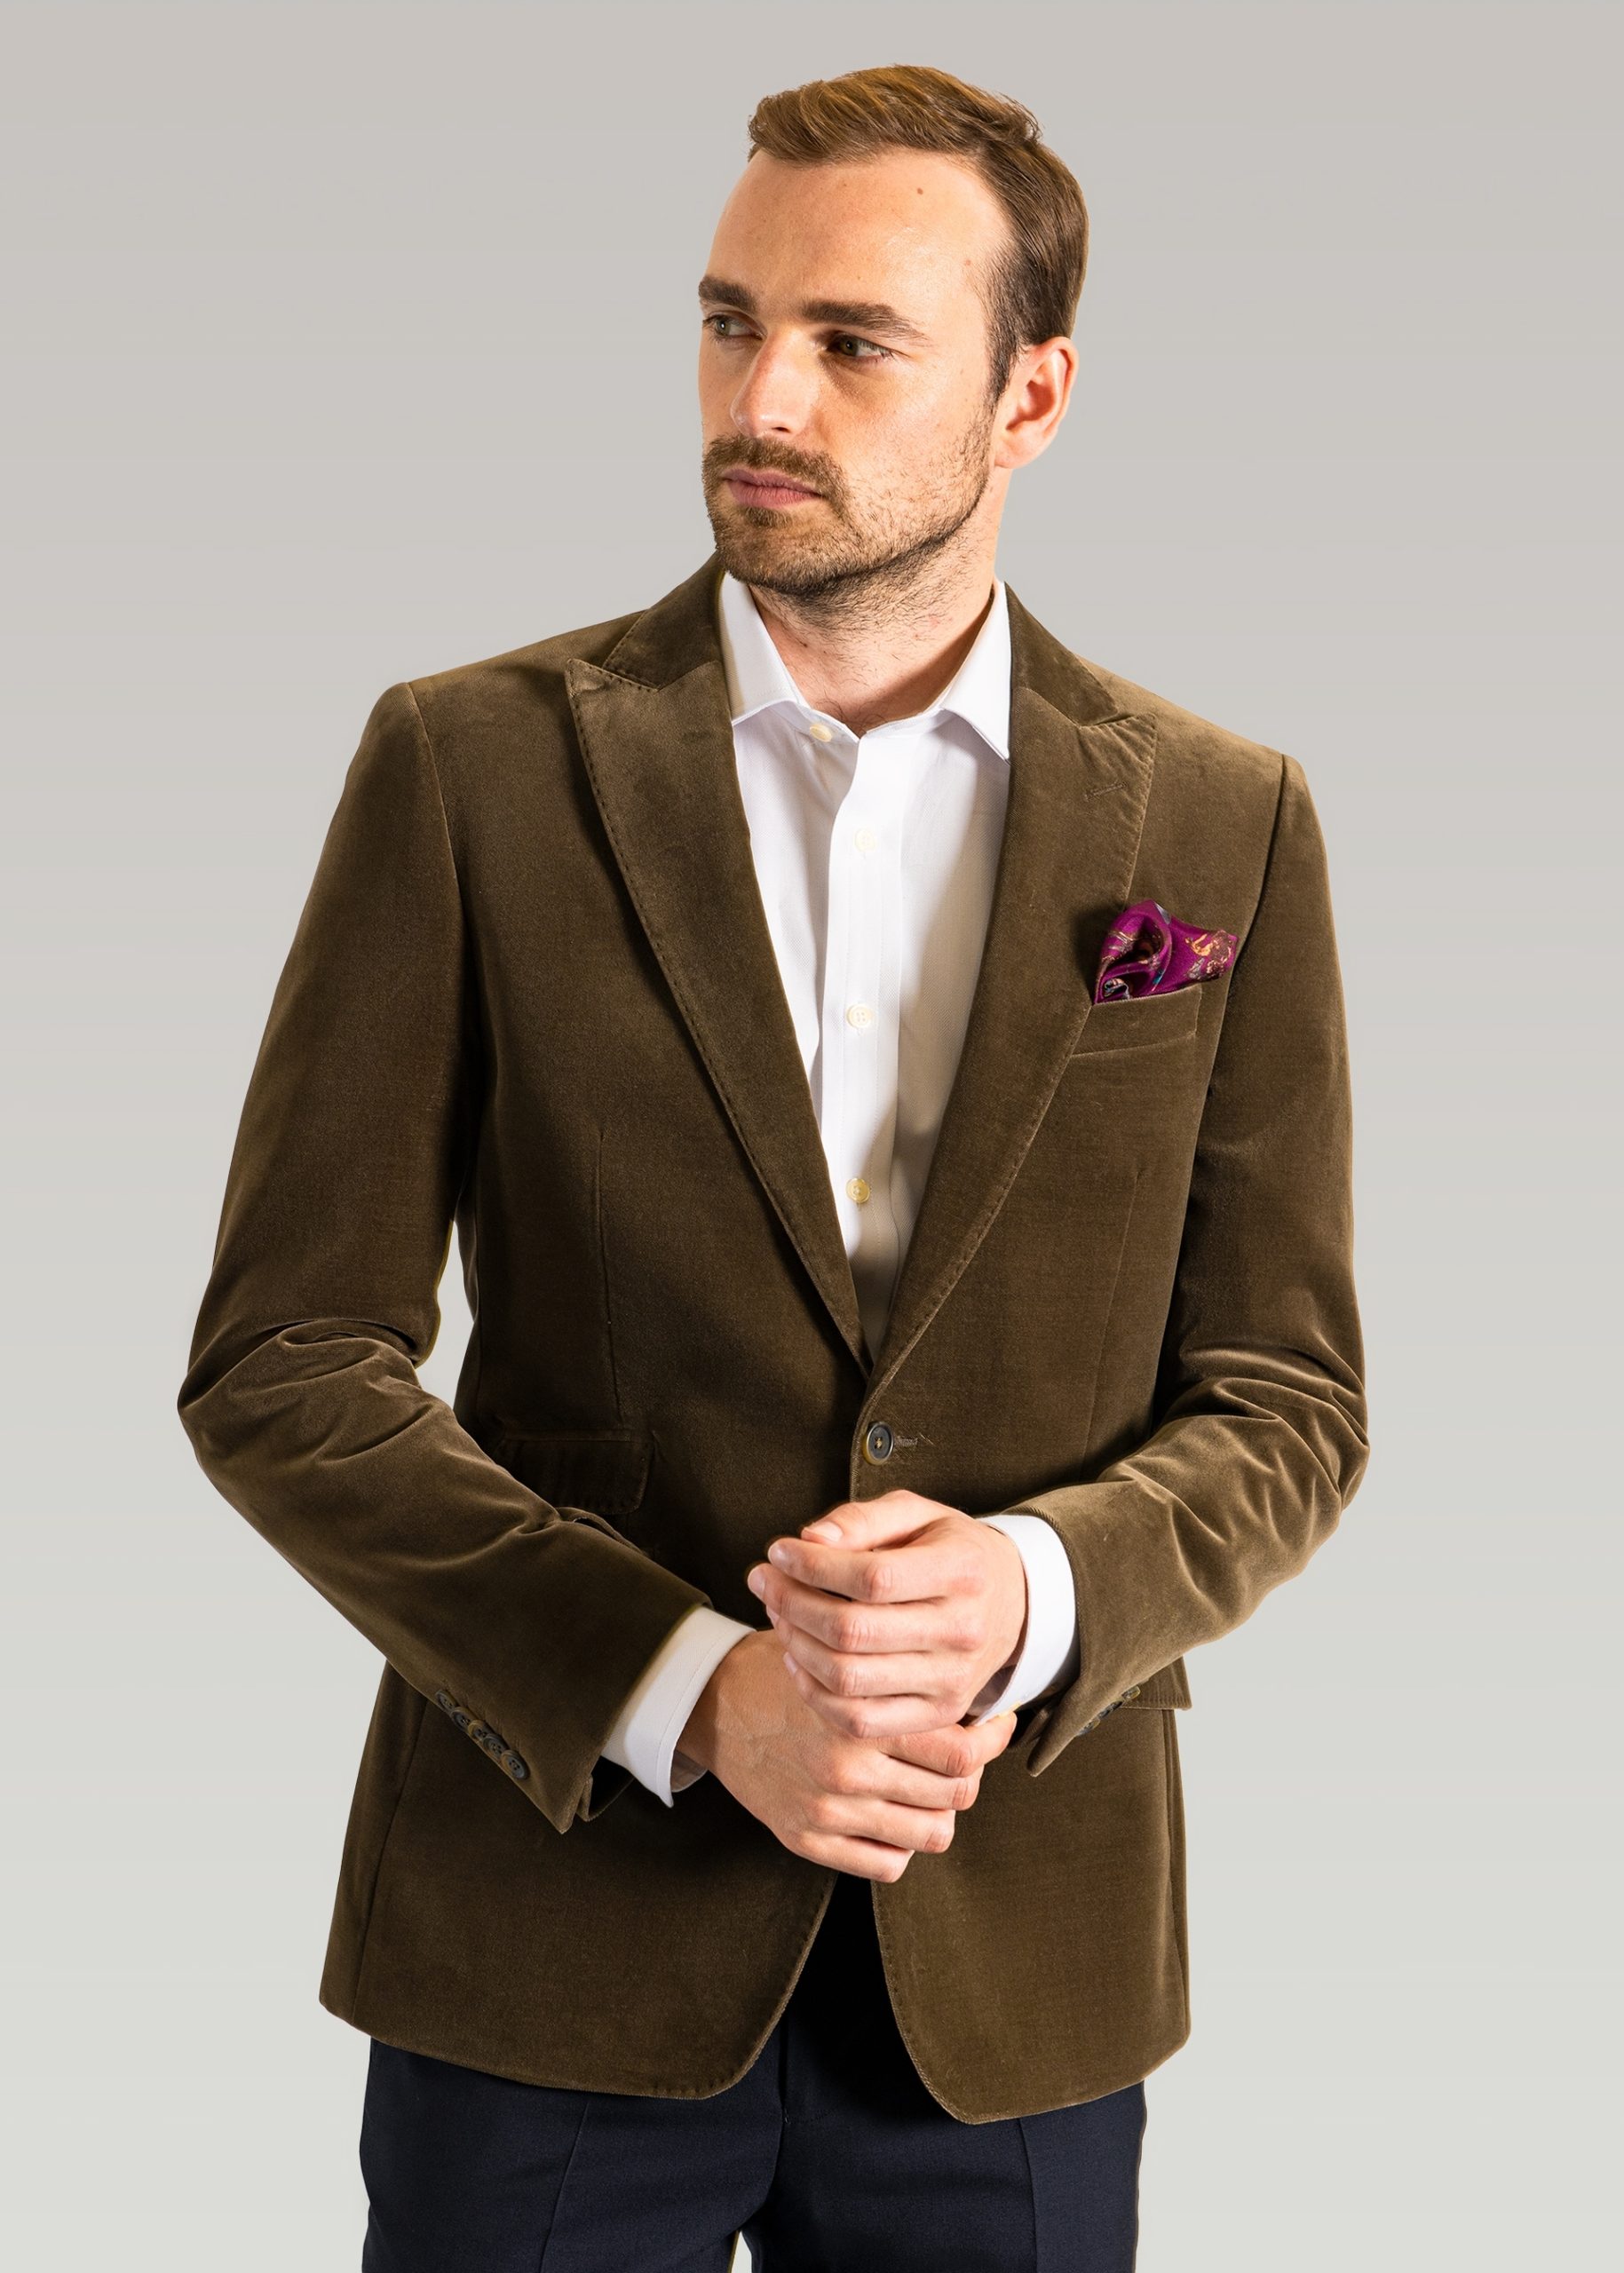 Men’s formal velvet jacket in olive green and styled with a silk pocket square